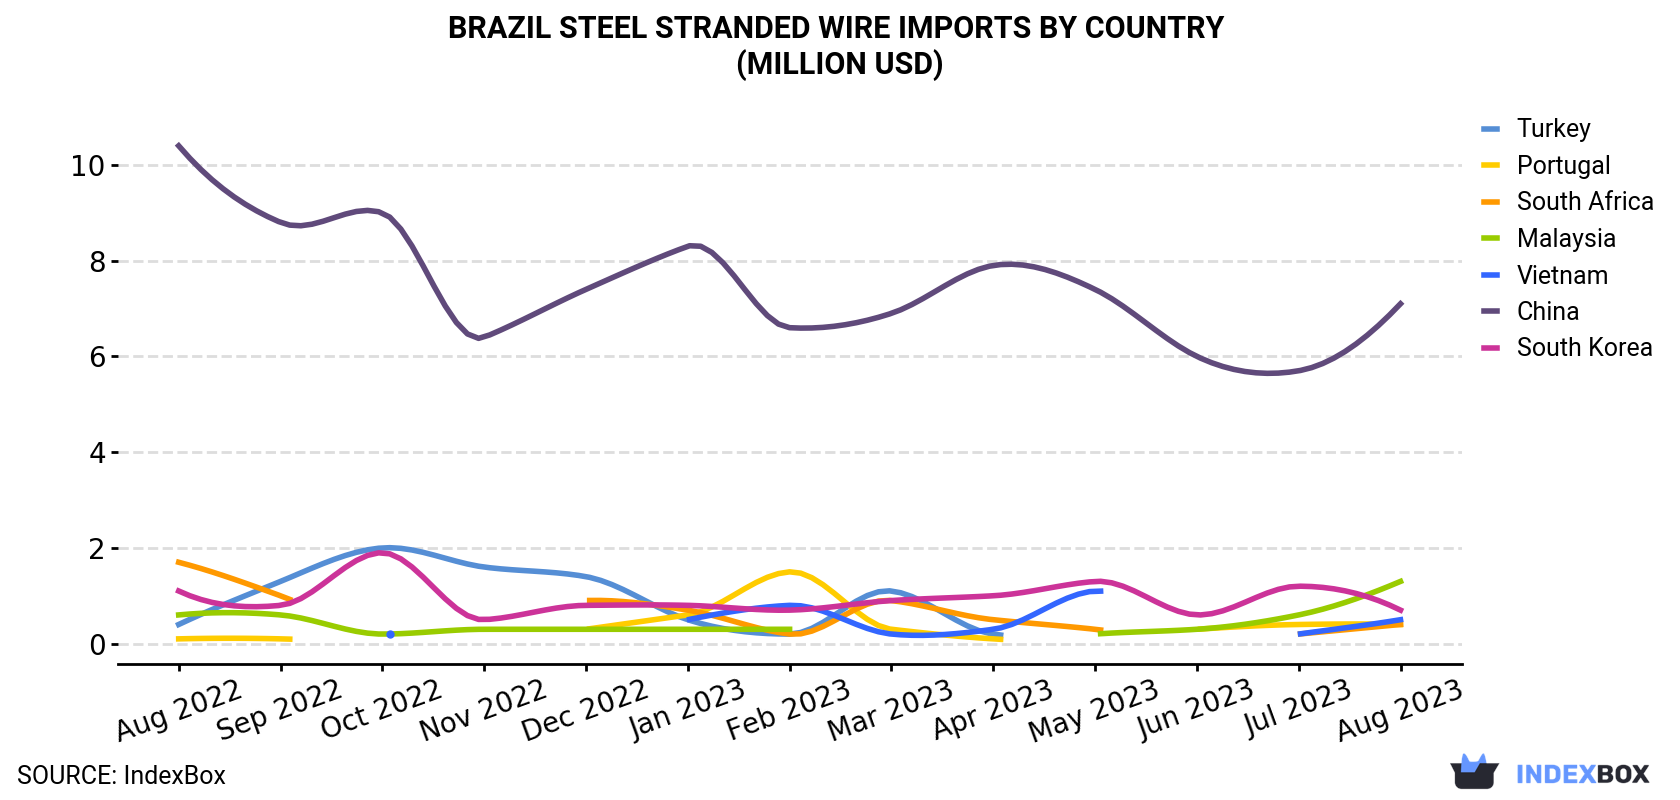 Brazil Steel Stranded Wire Imports By Country (Million USD)